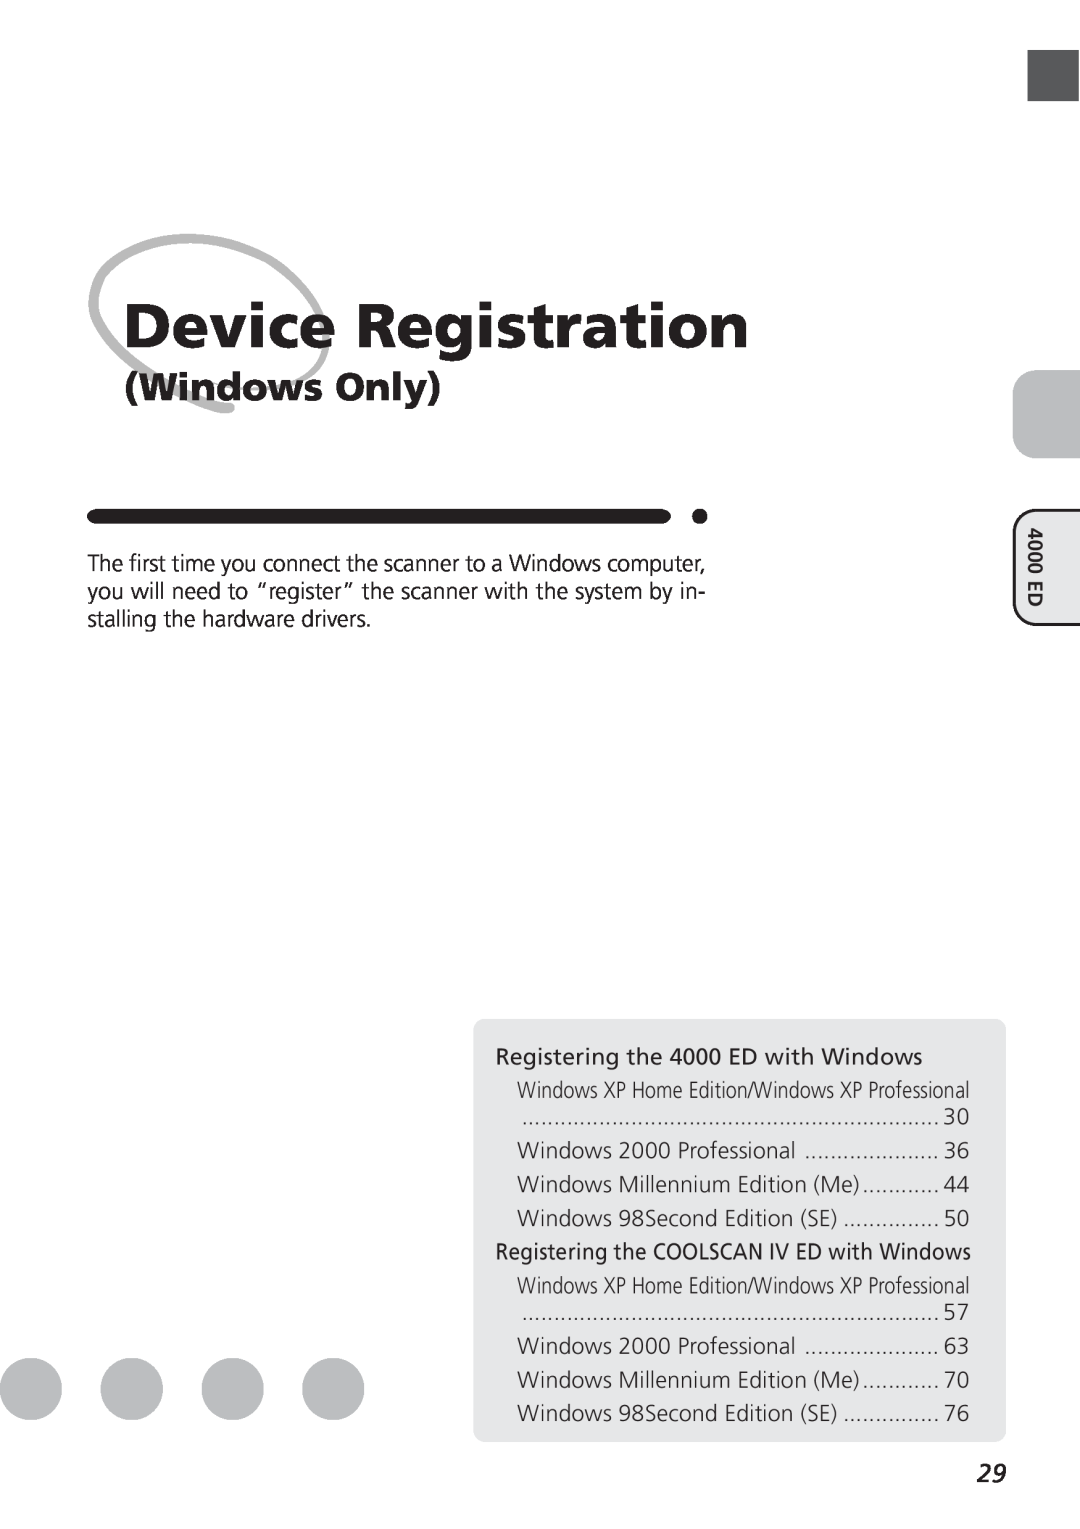 Nikon LS4000 user manual Device Registration, Registering the 4000 ED with Windows, Windows Only 